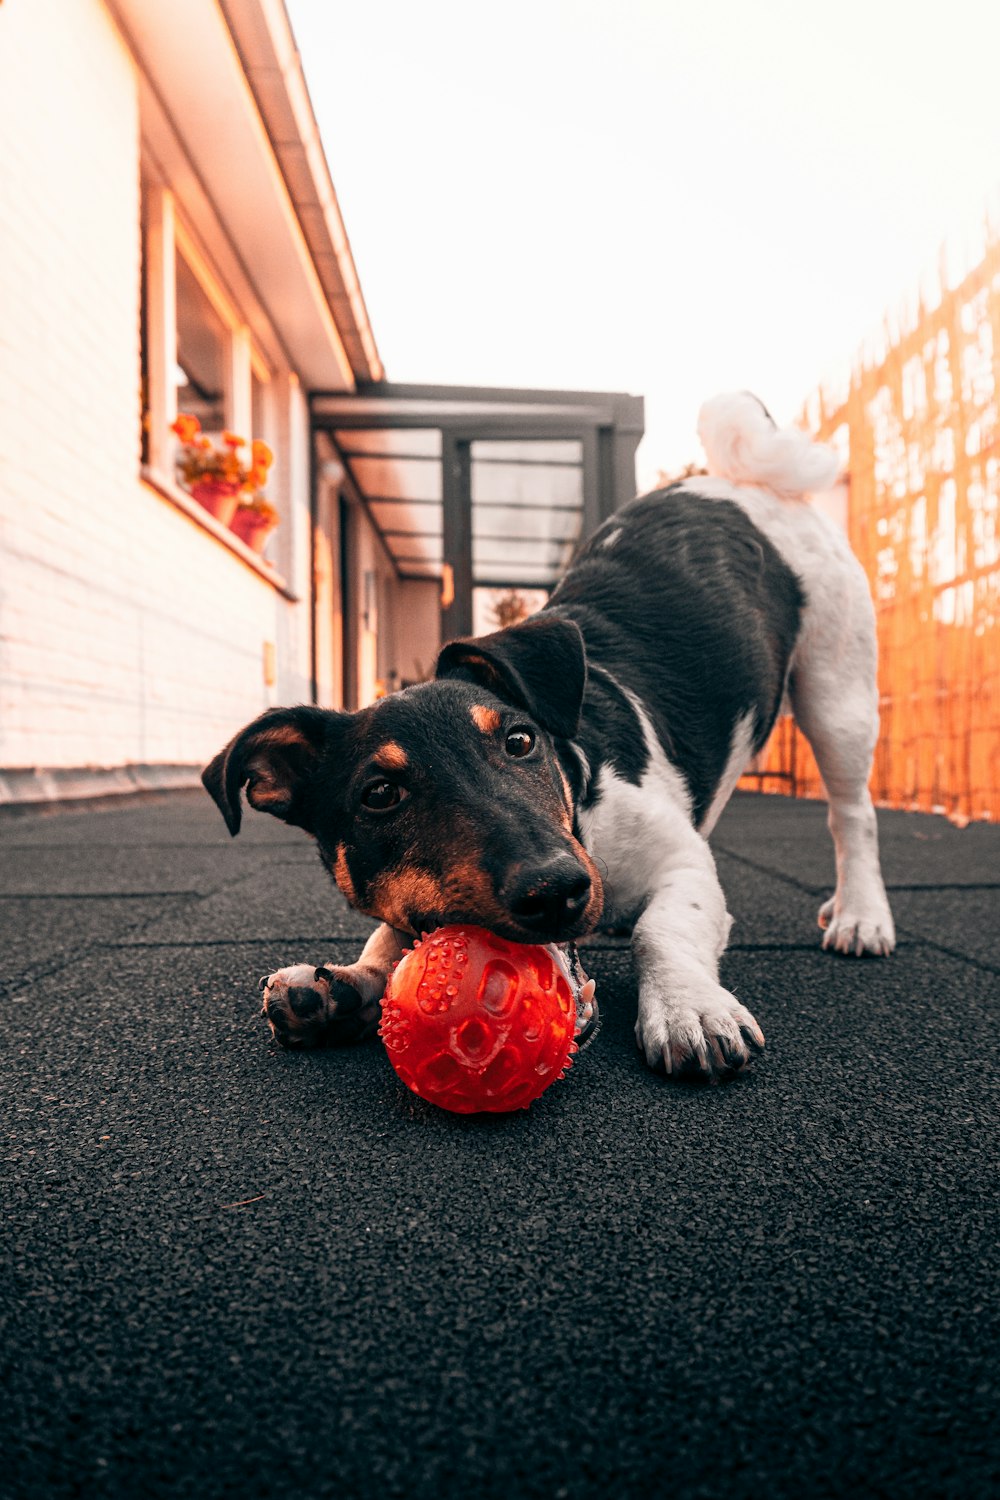 black and white short coated dog playing red ball on black carpet